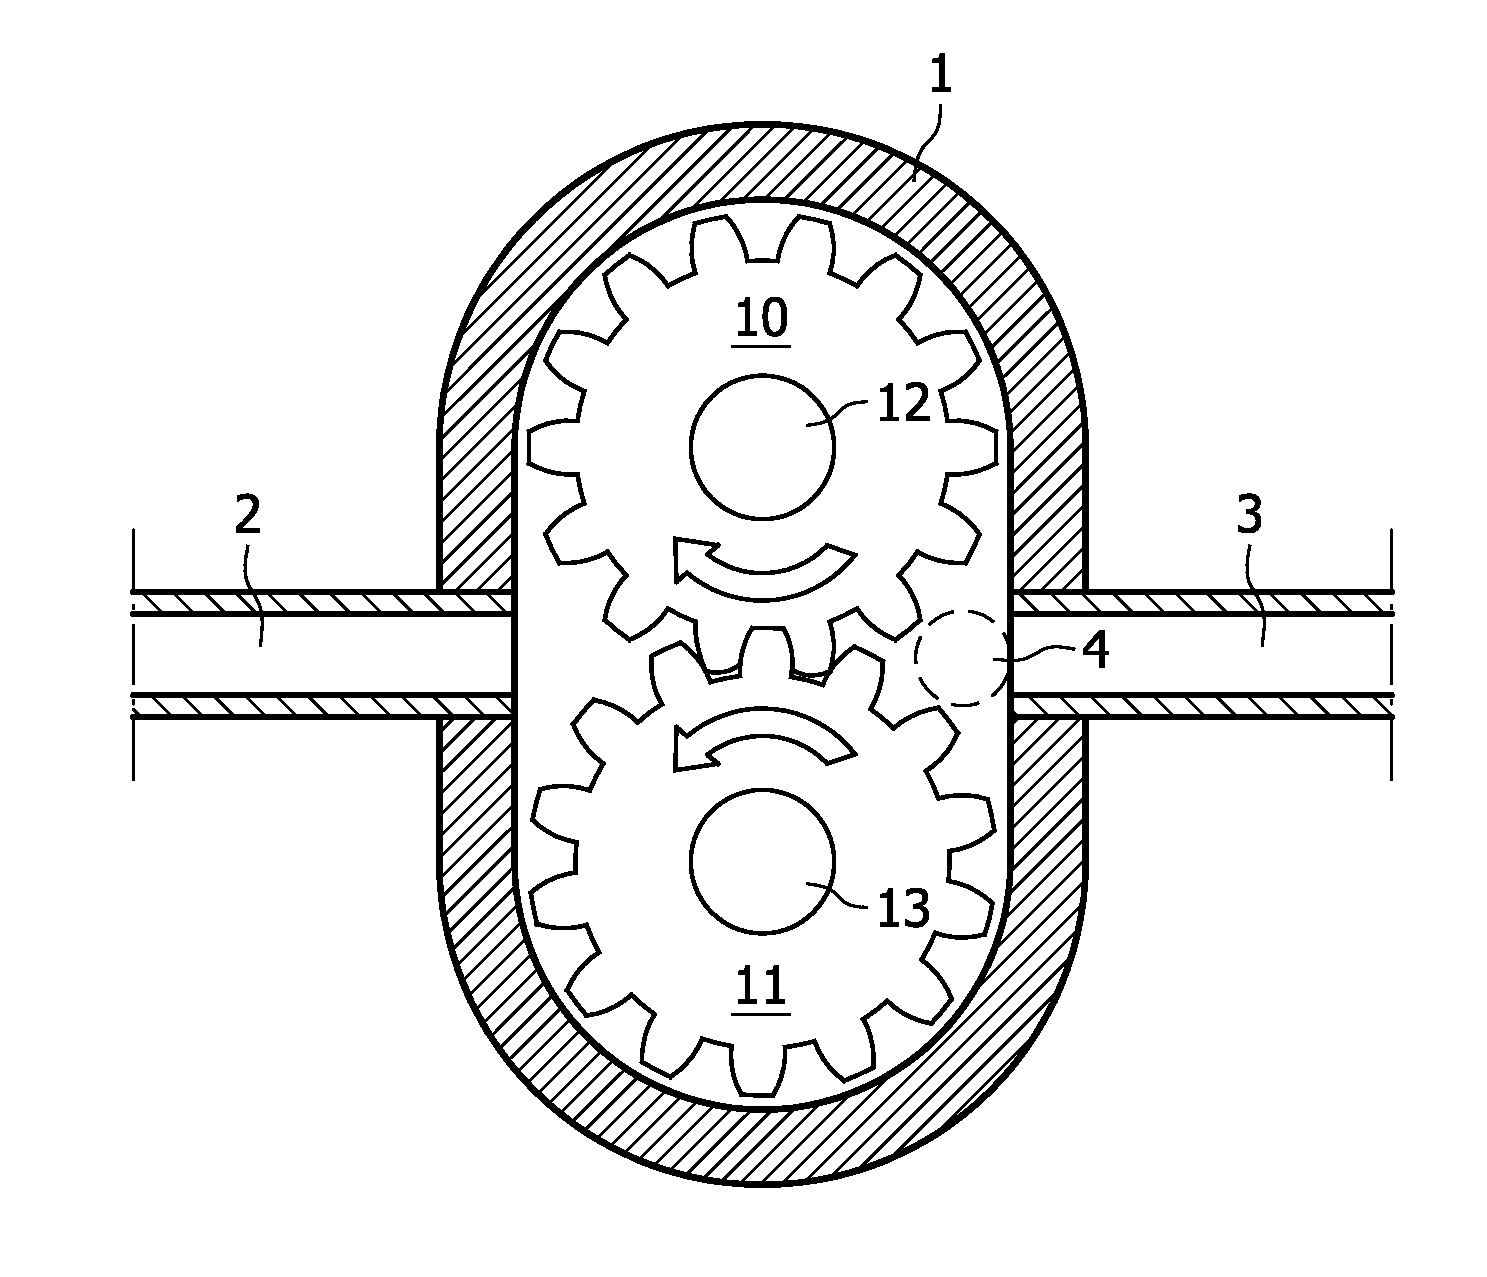 Device and method for frothing a liquid